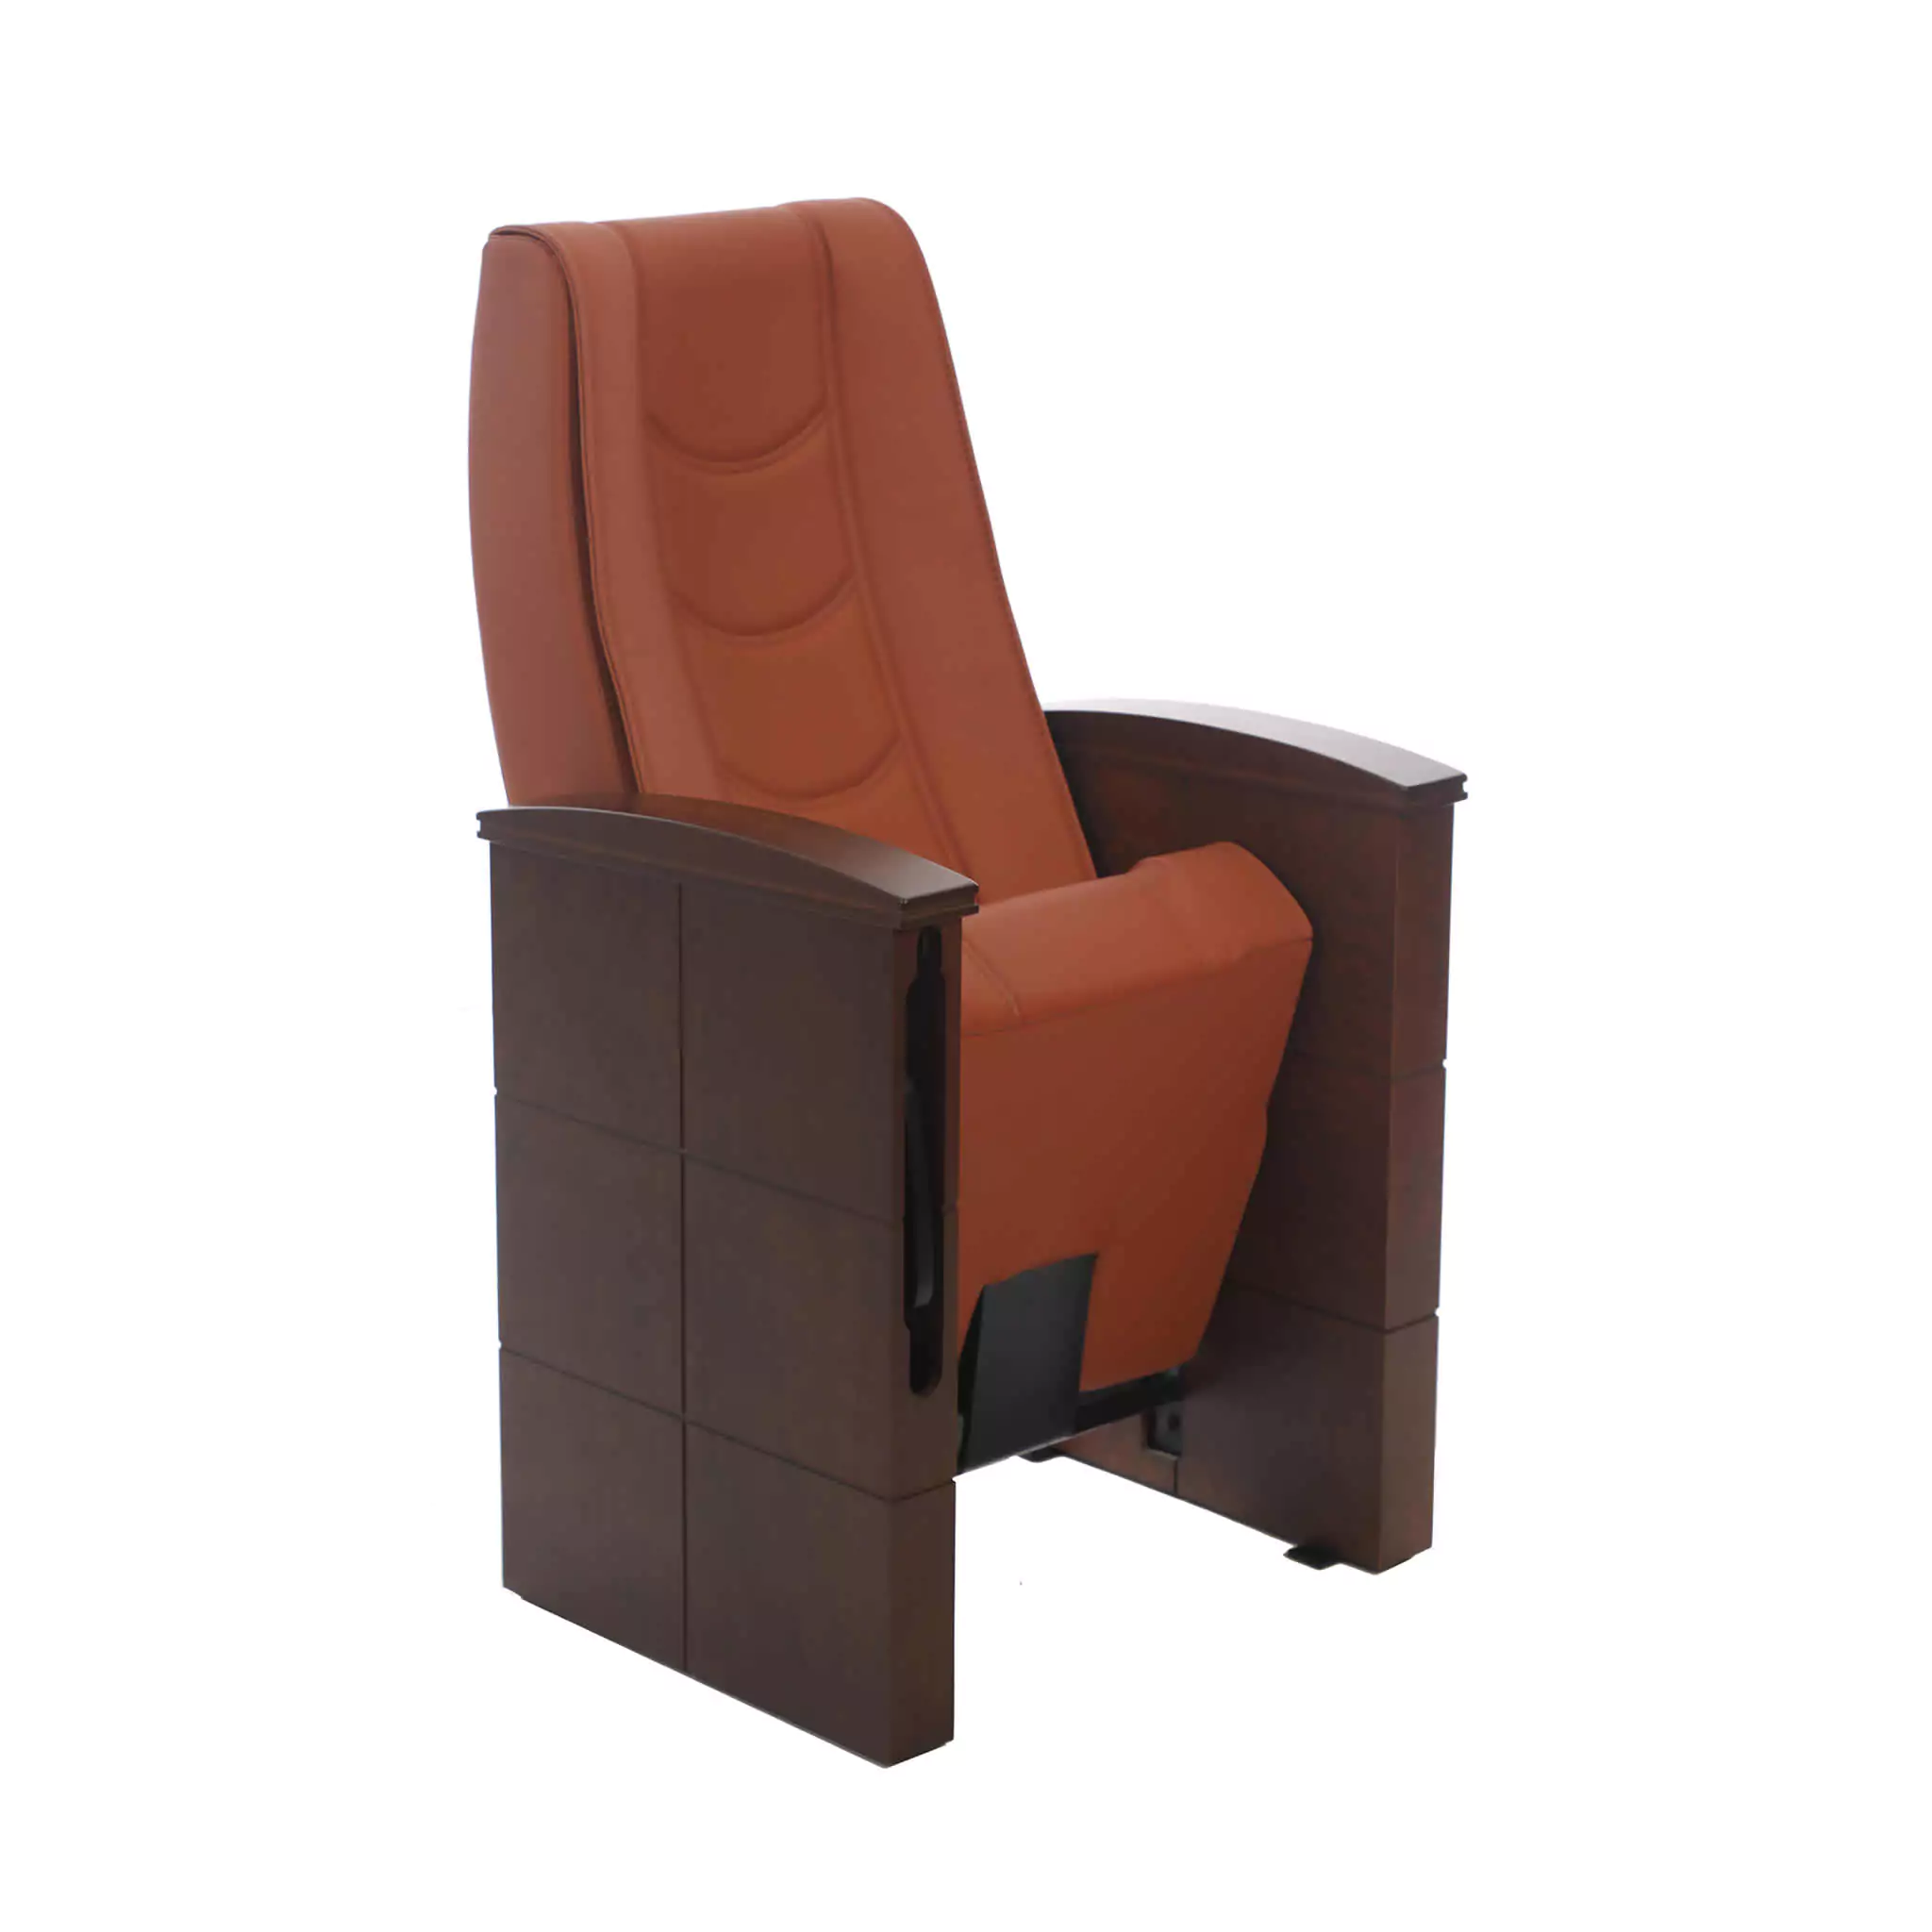 Simko Seating Products Conference Seat Obsidian